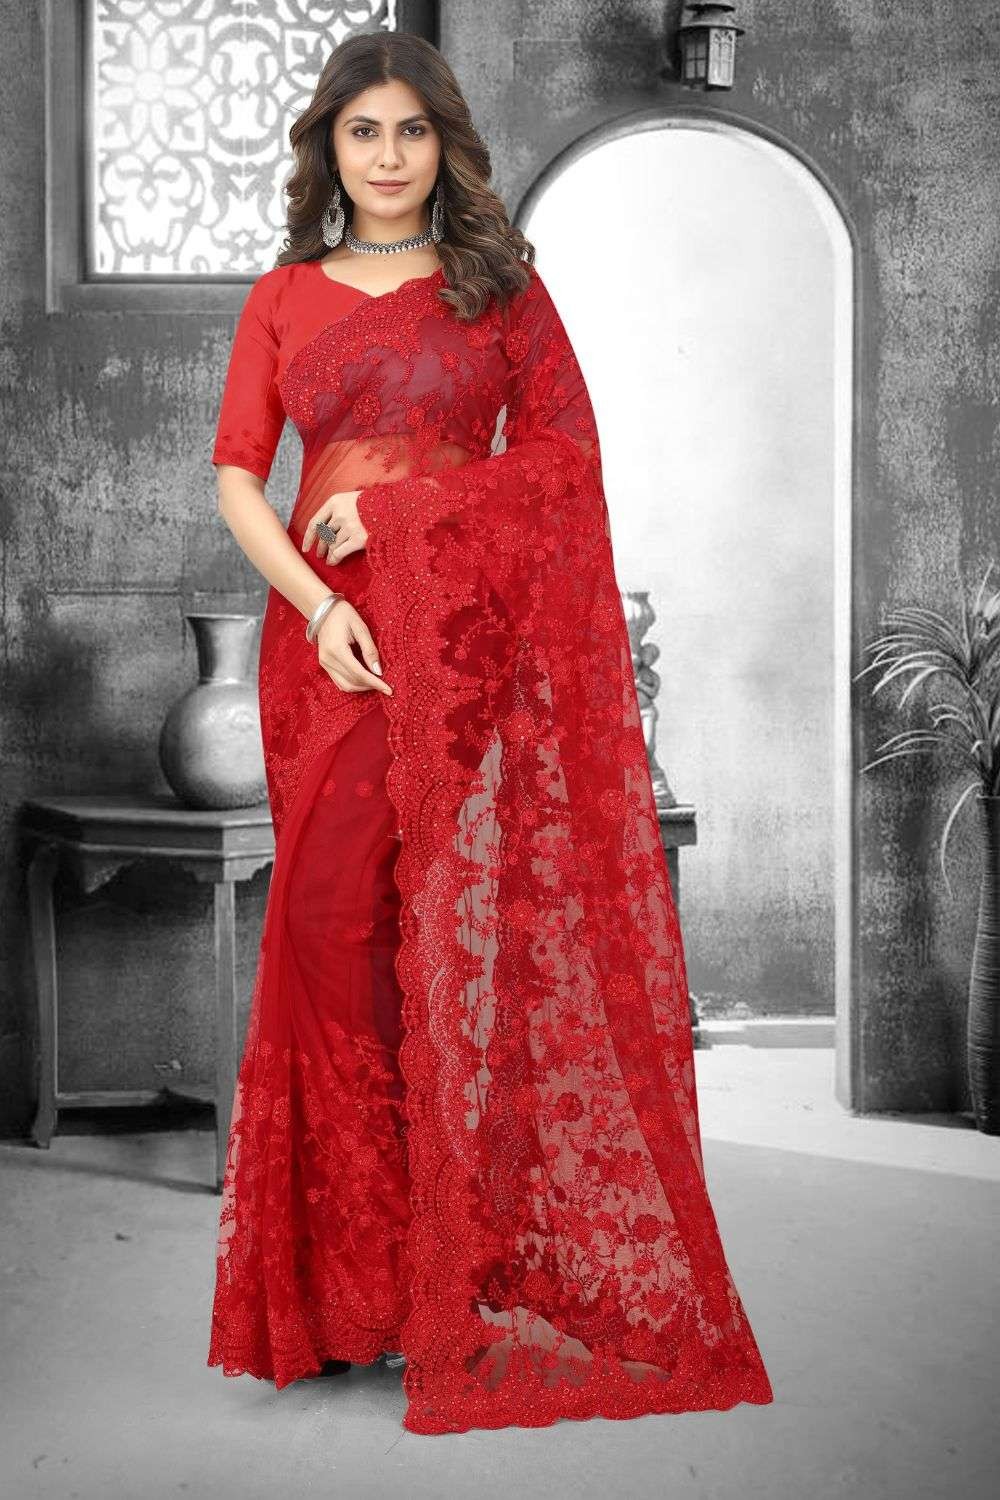 Net Embroidered Red Wedding Saree with Blouse - SR25122